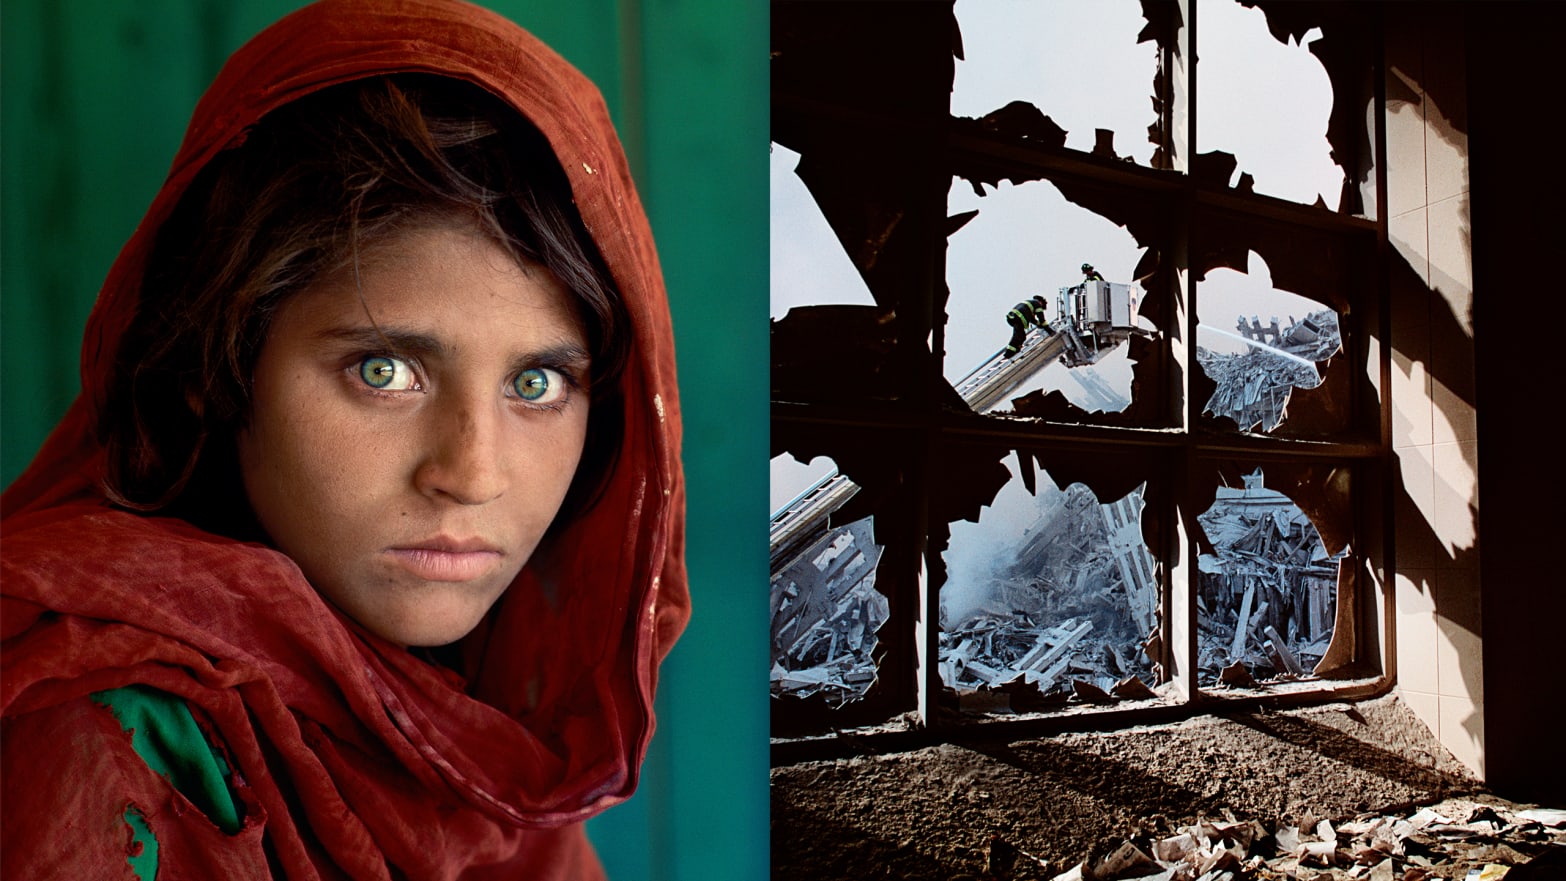 From 'Afghan Girl' to Ground Zero, the World Through Steve McCurry's Lens